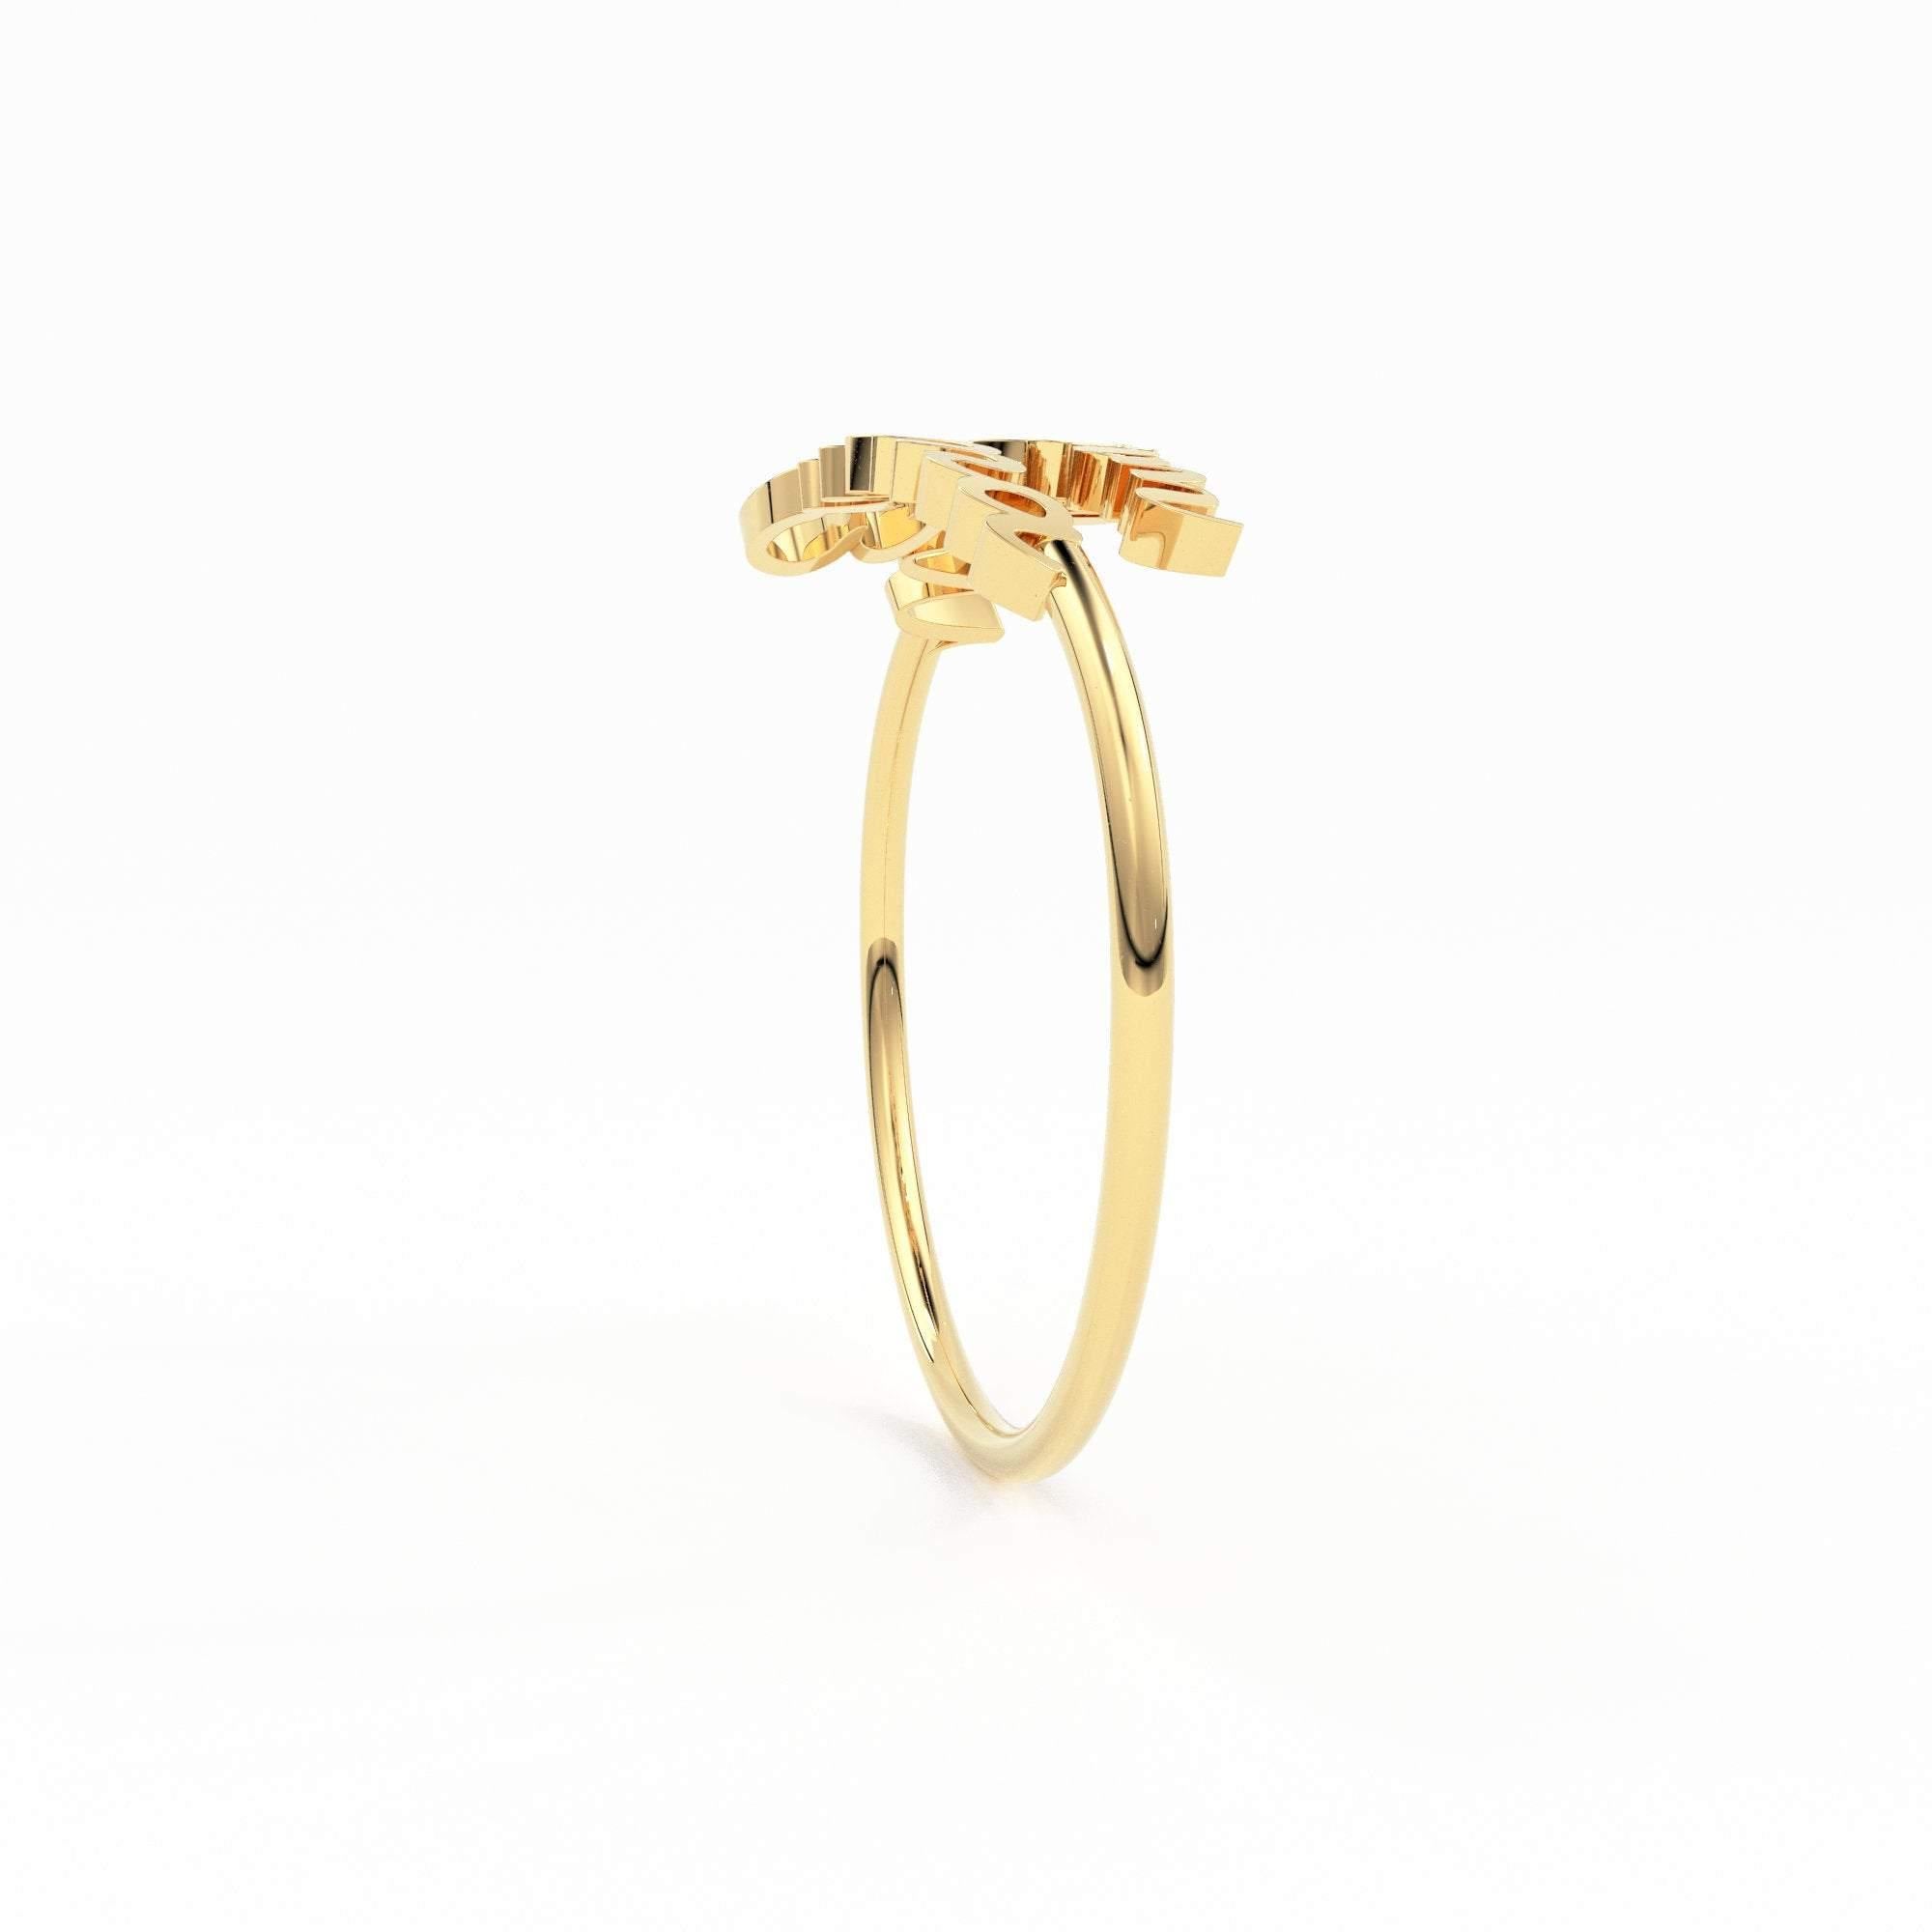 Heart-shaped gold signet ring with two initial